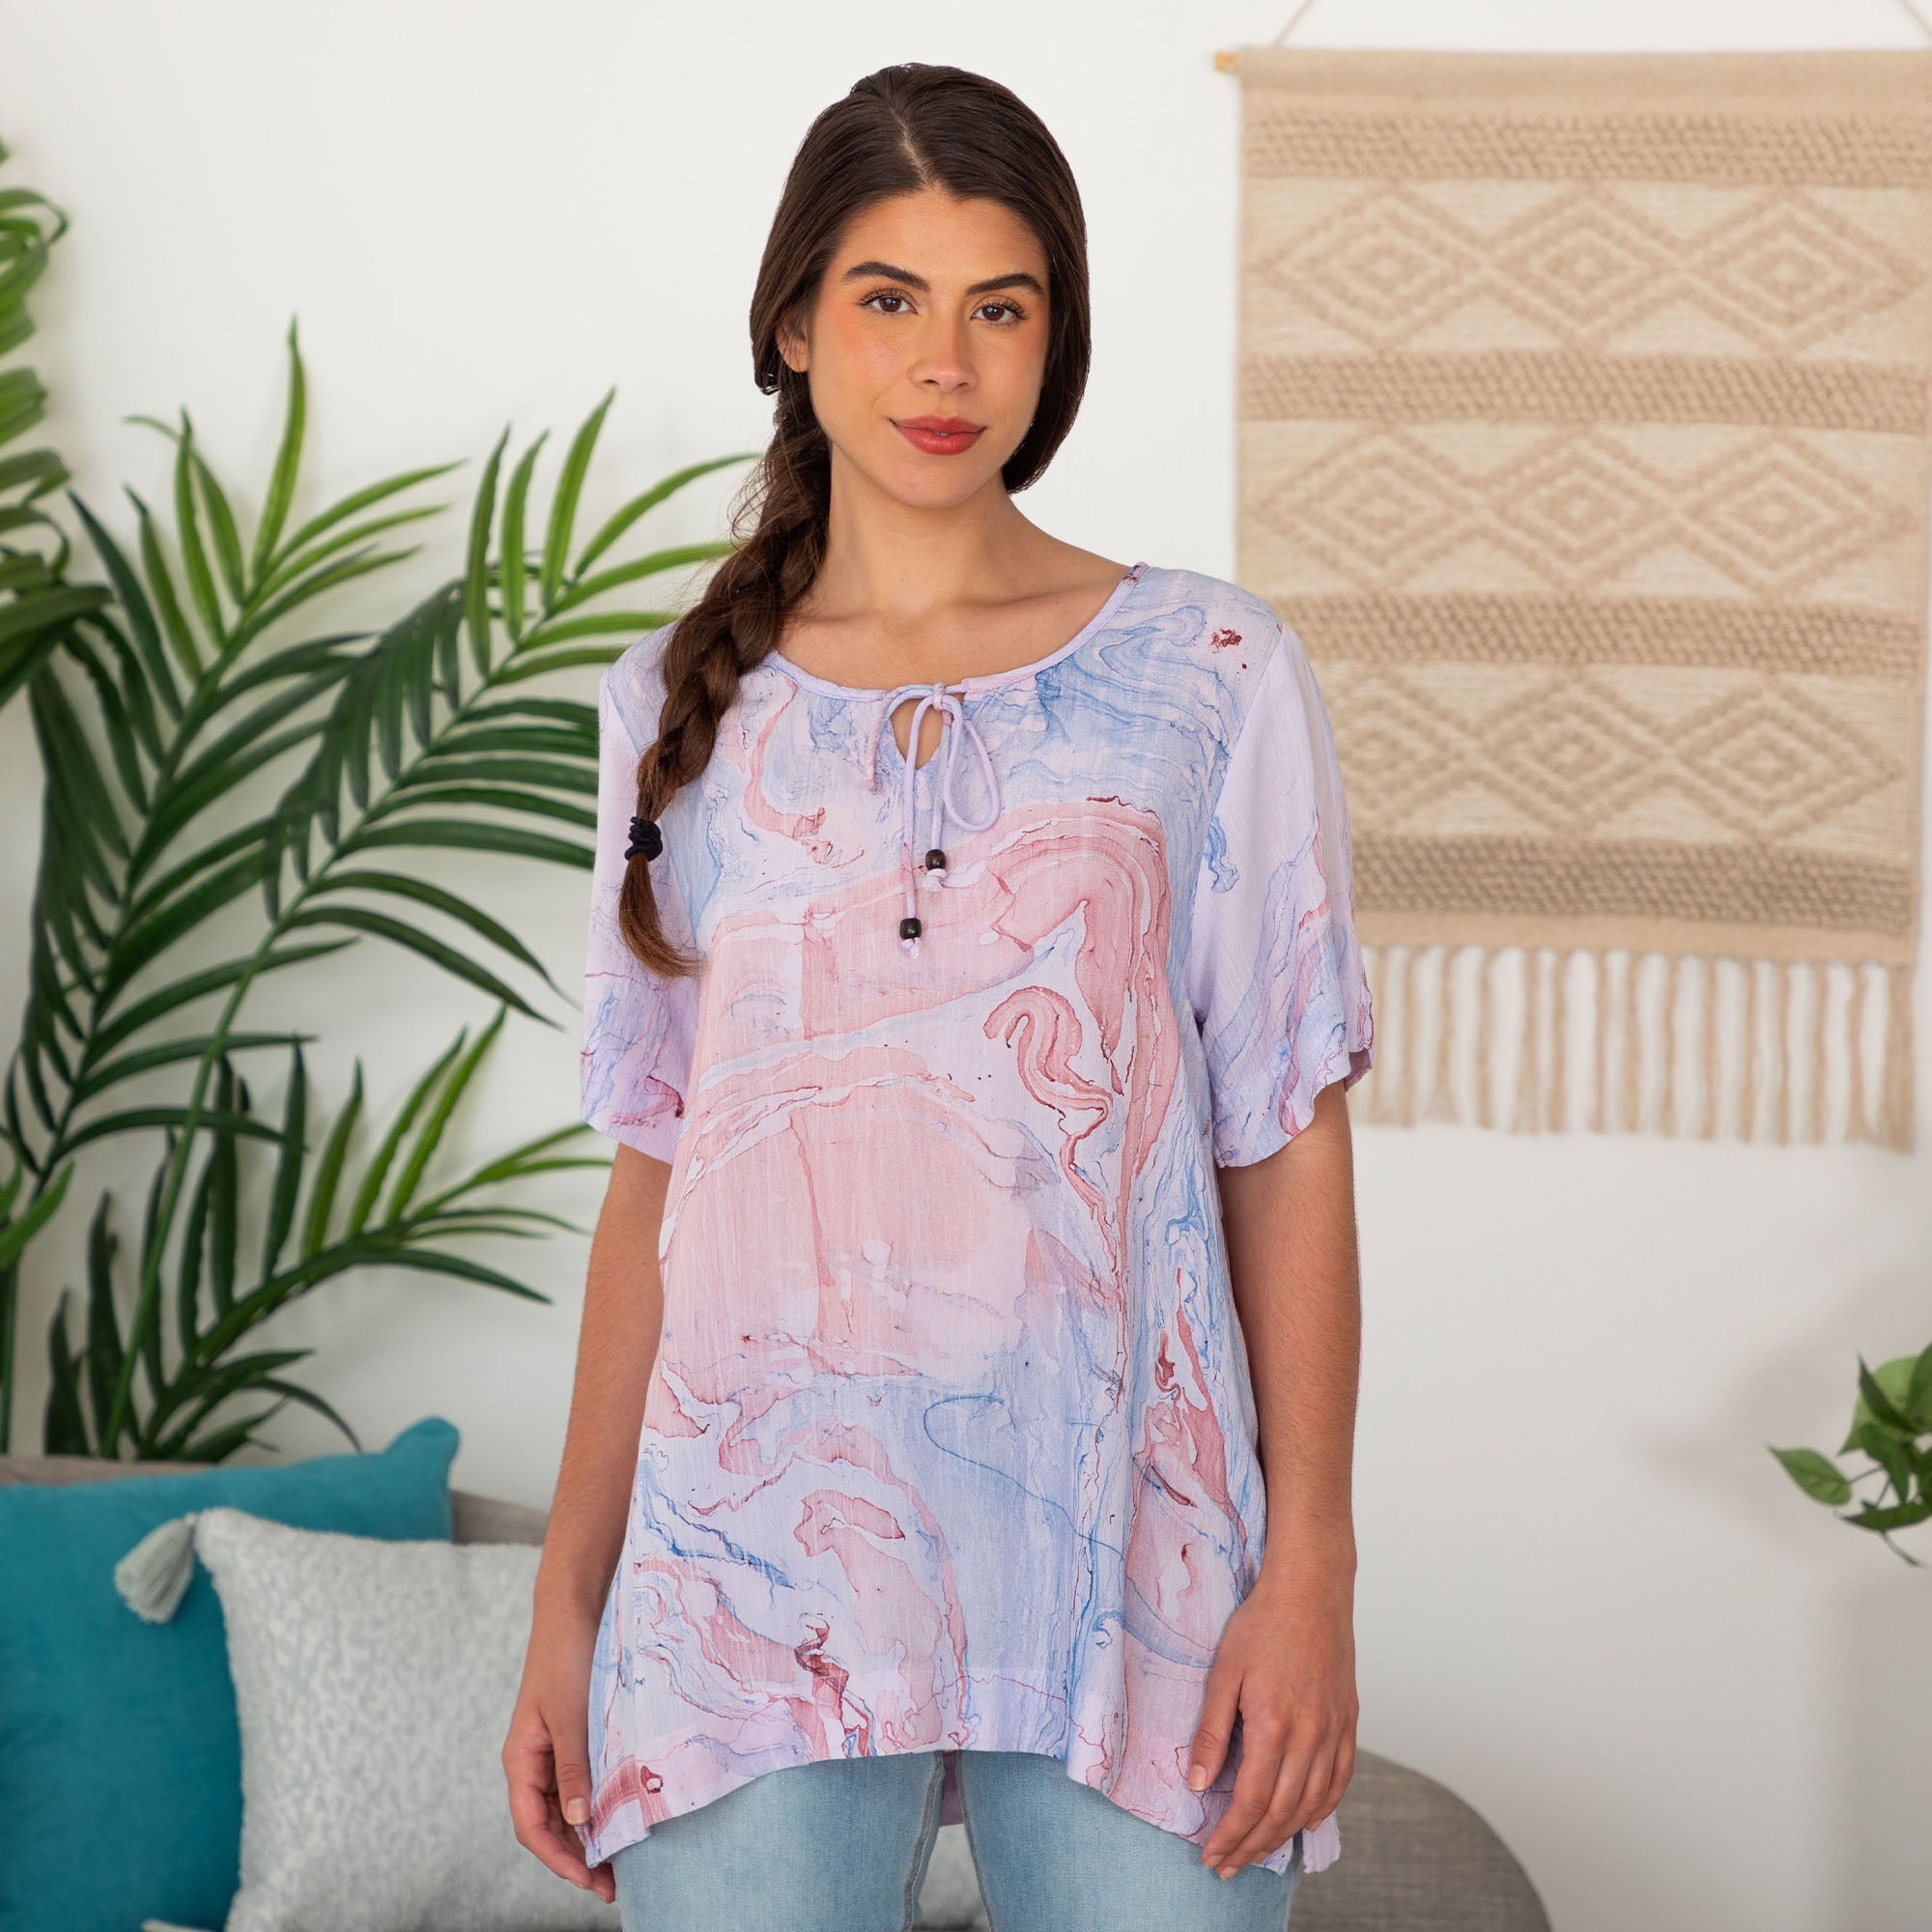 Orchid Swirl Short Sleeve Top - S/M